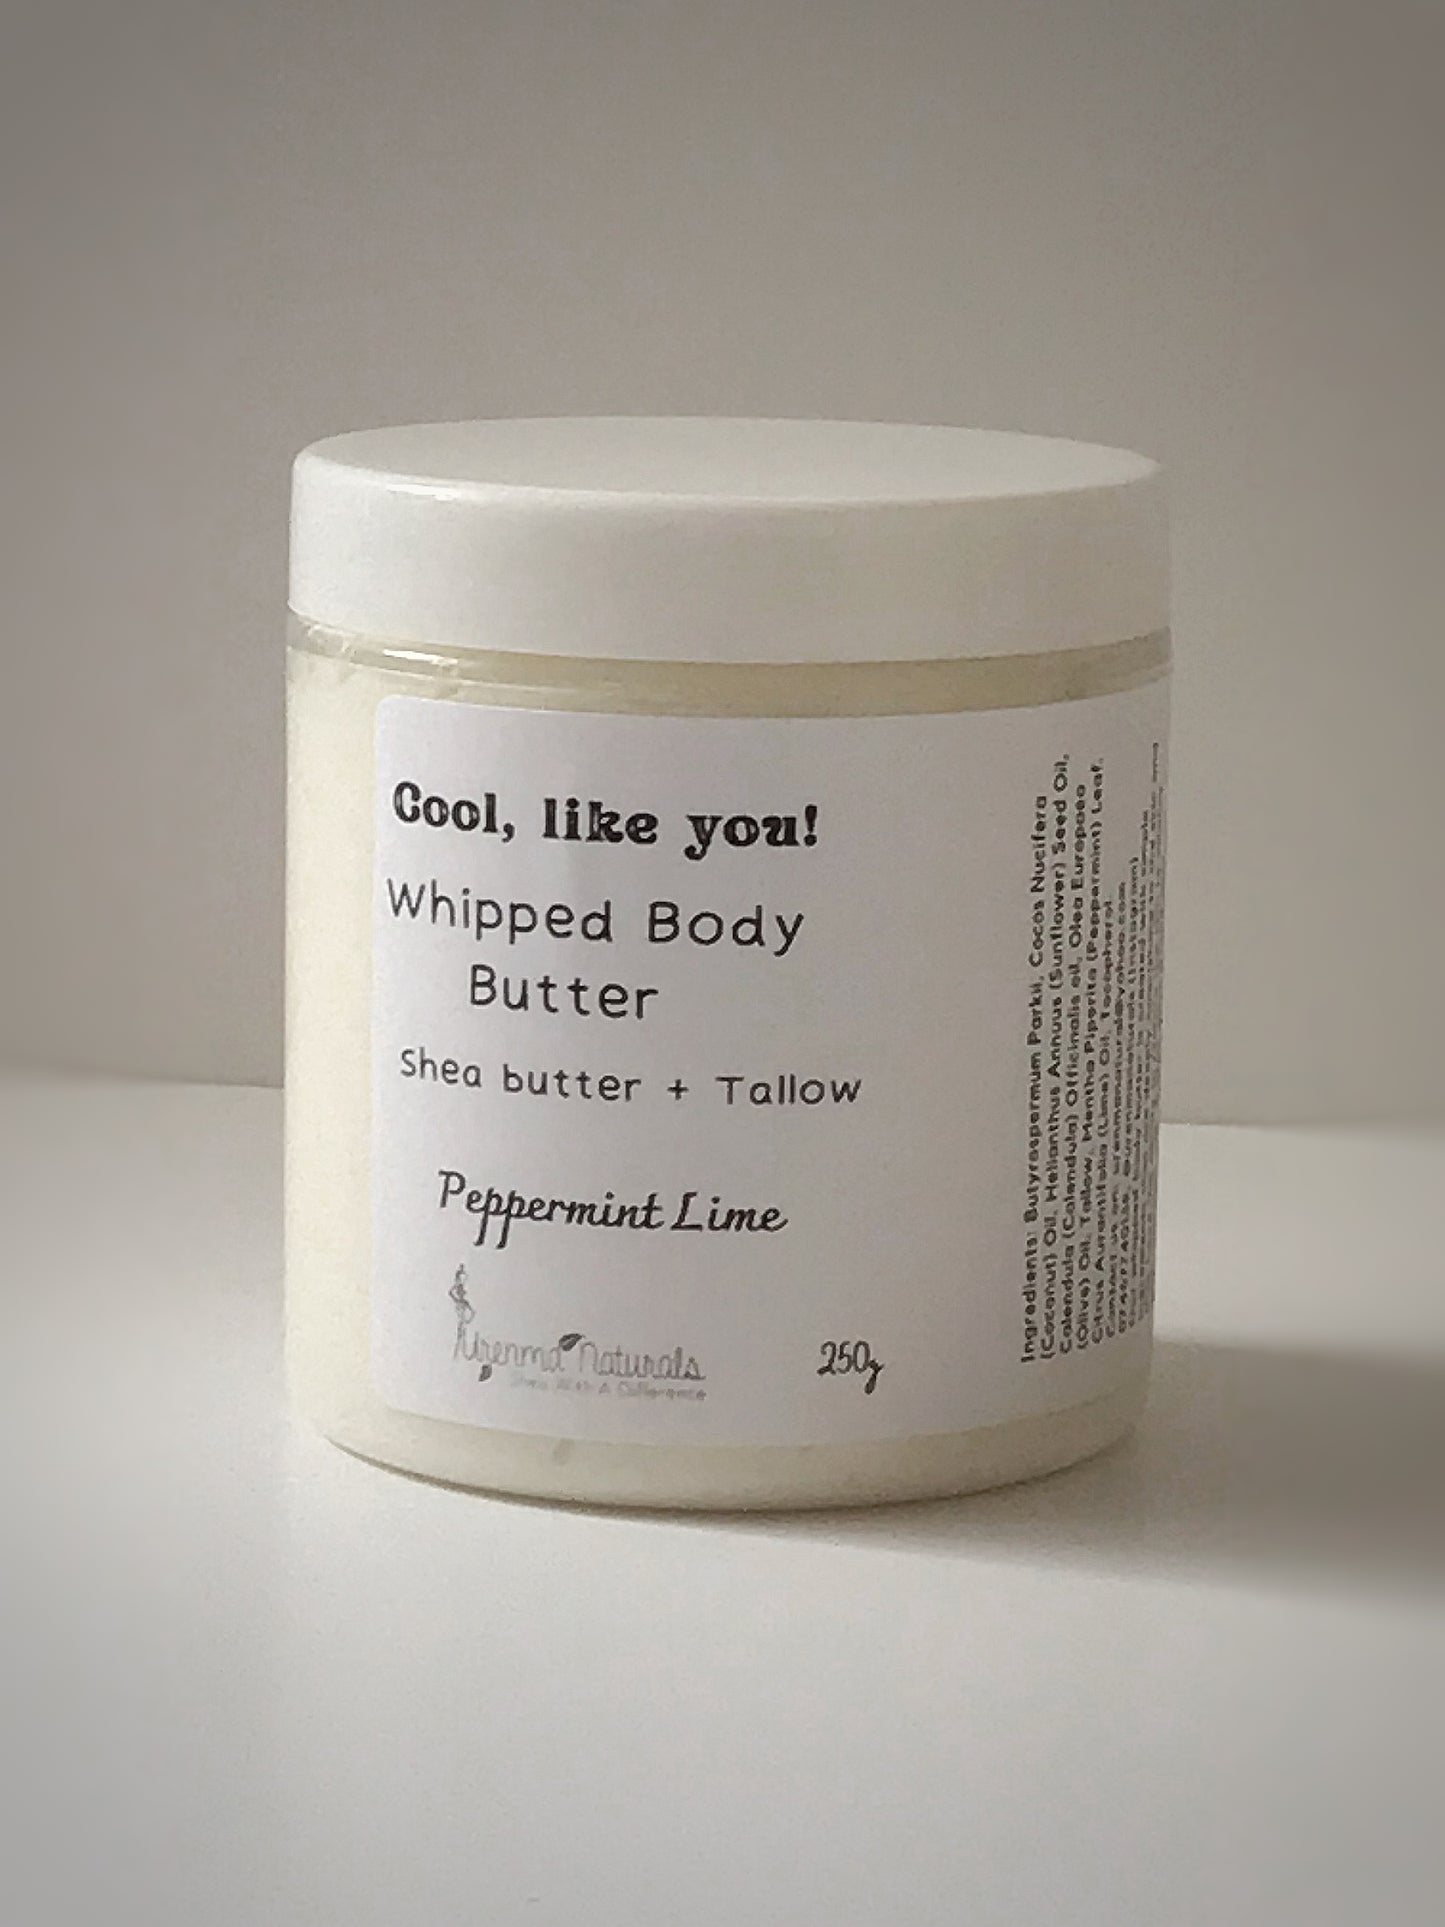 Peppermint Lime, Cool, Like you!, Whipped Body Butter